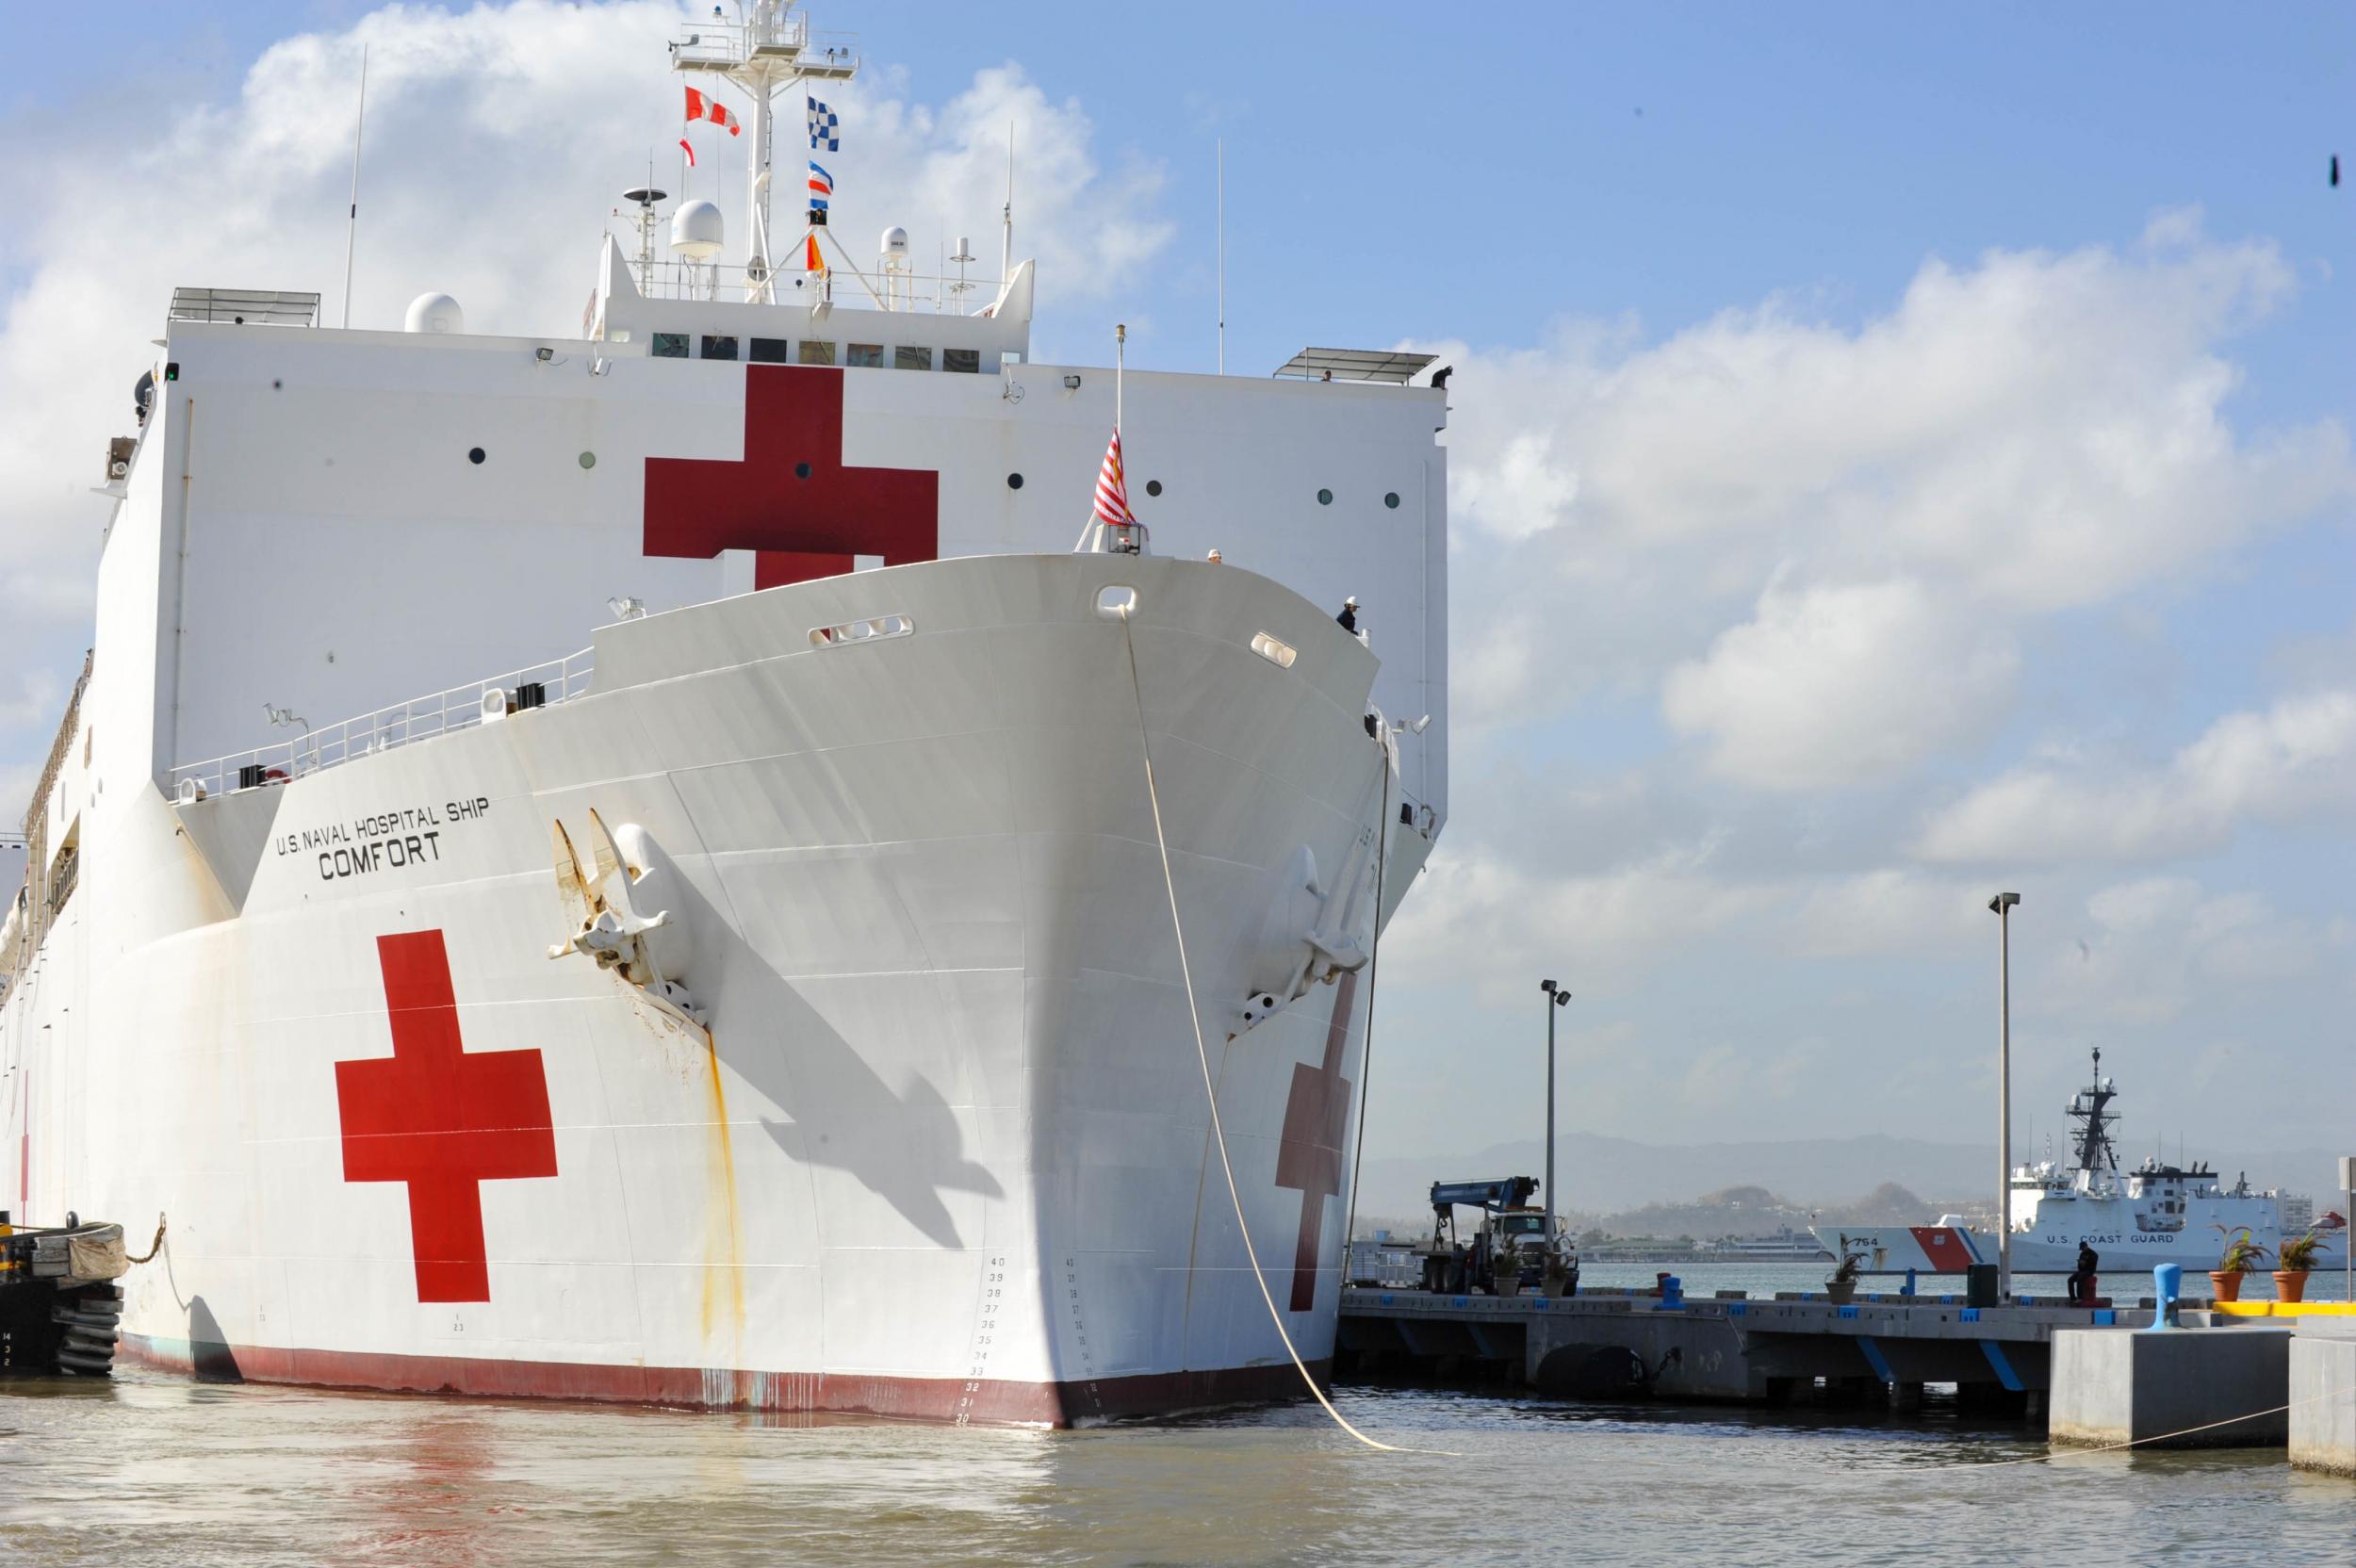 The USNS Comfort has been deployed to Puerto Rico, but nobody knows how to get patients to it